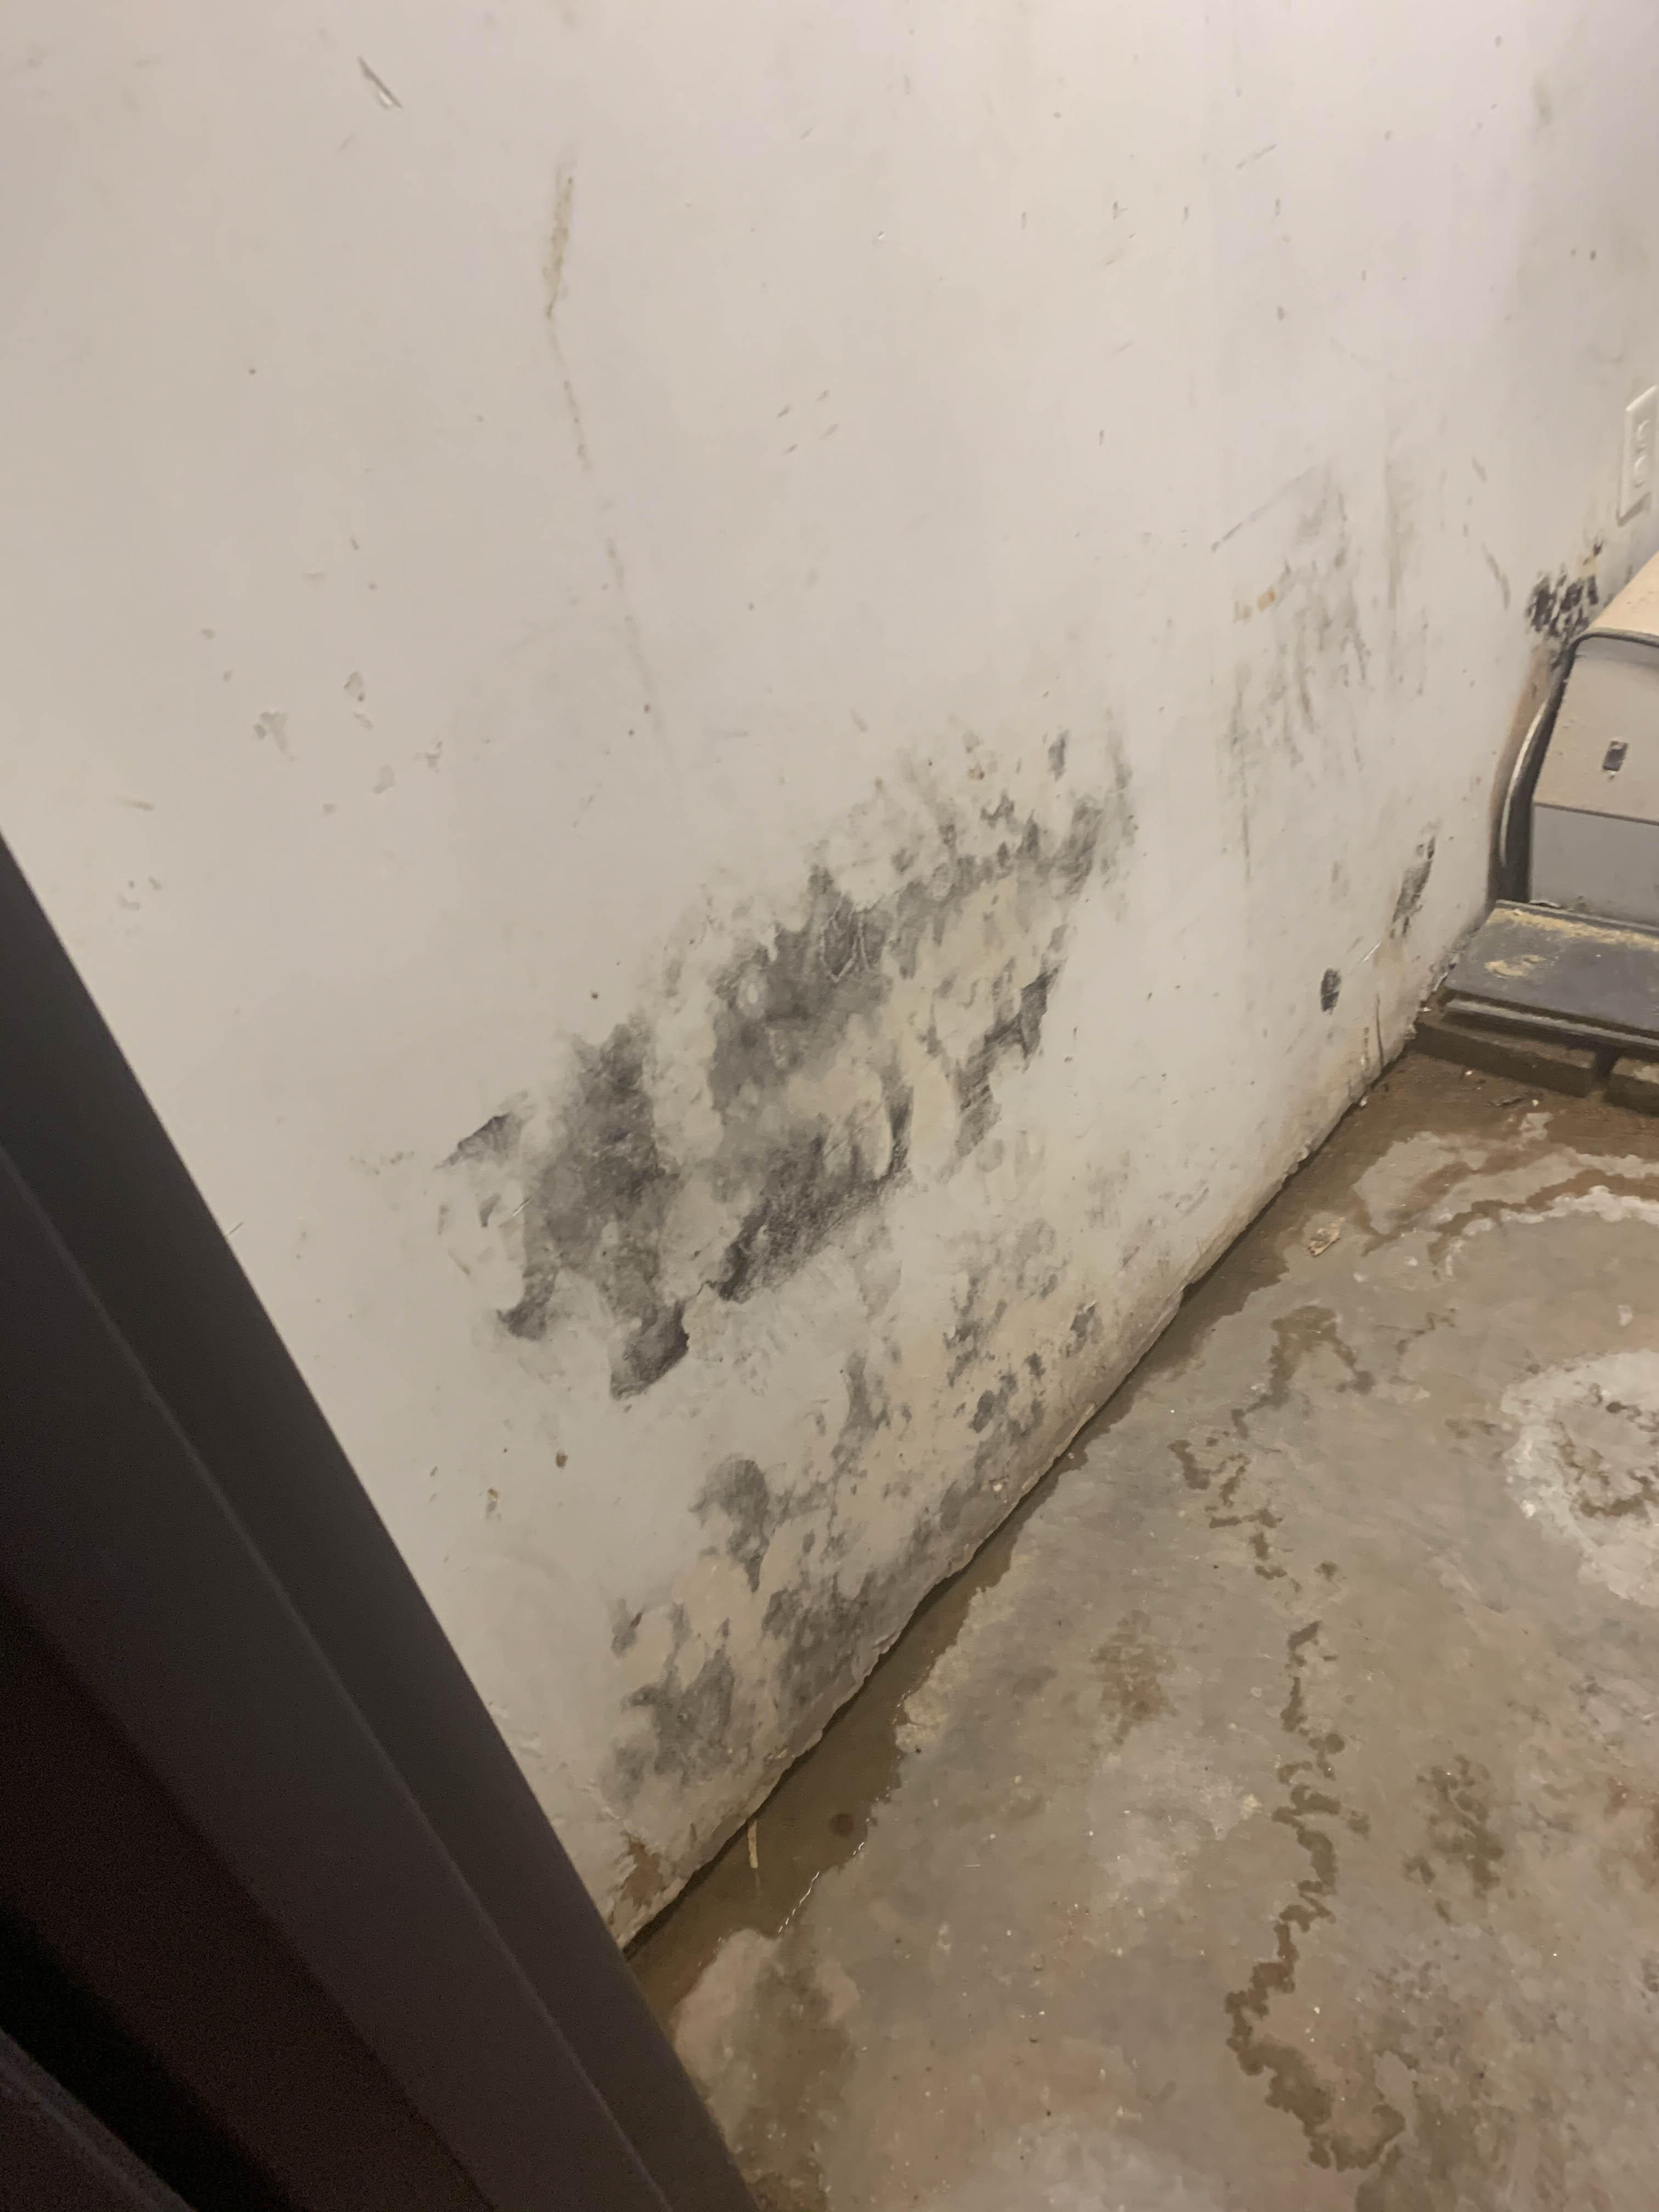 If you suspect or have discovered a potential mold infestation, please give our SERVPRO of South Garland crew a call today!